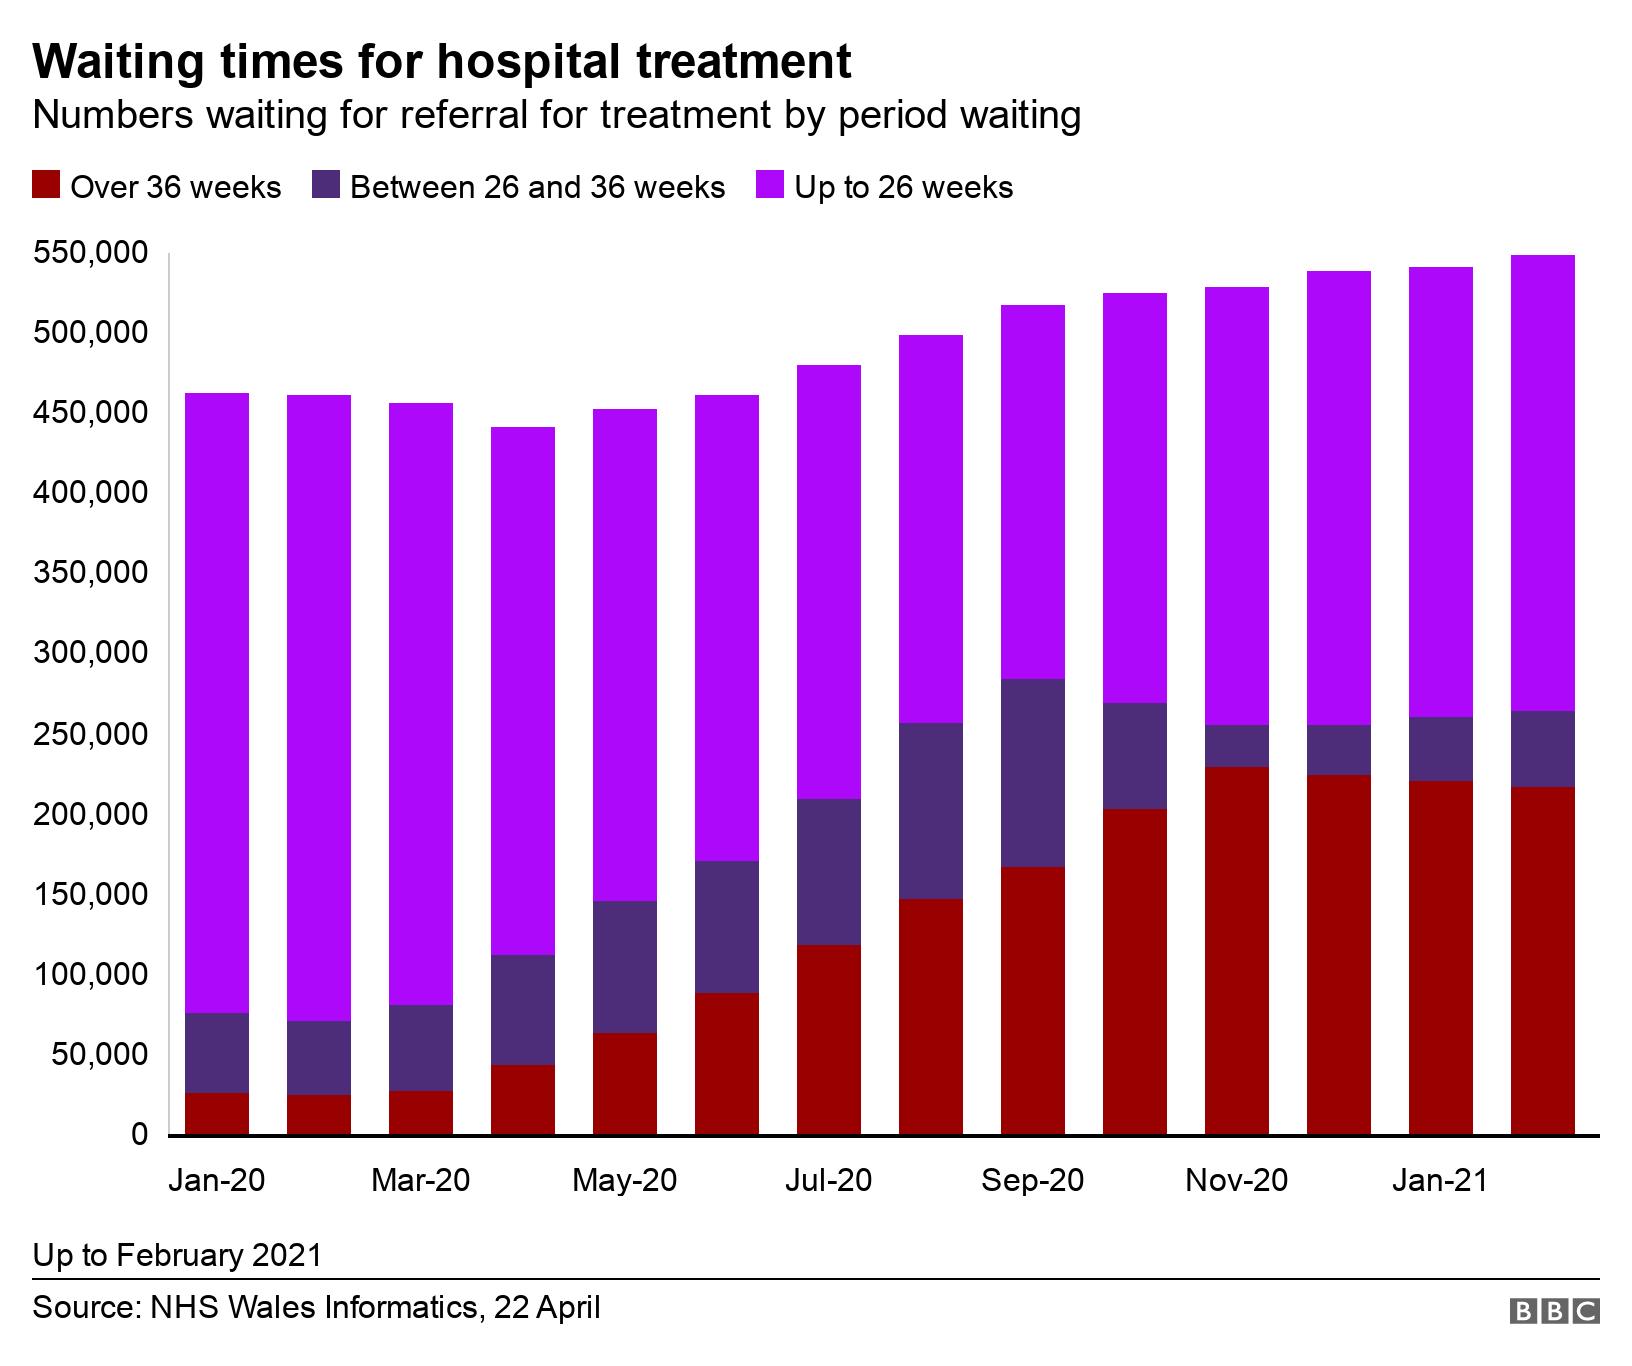 Waiting times for hospital treatment. Numbers waiting for referral for treatment by period waiting.  Up to February 2021.